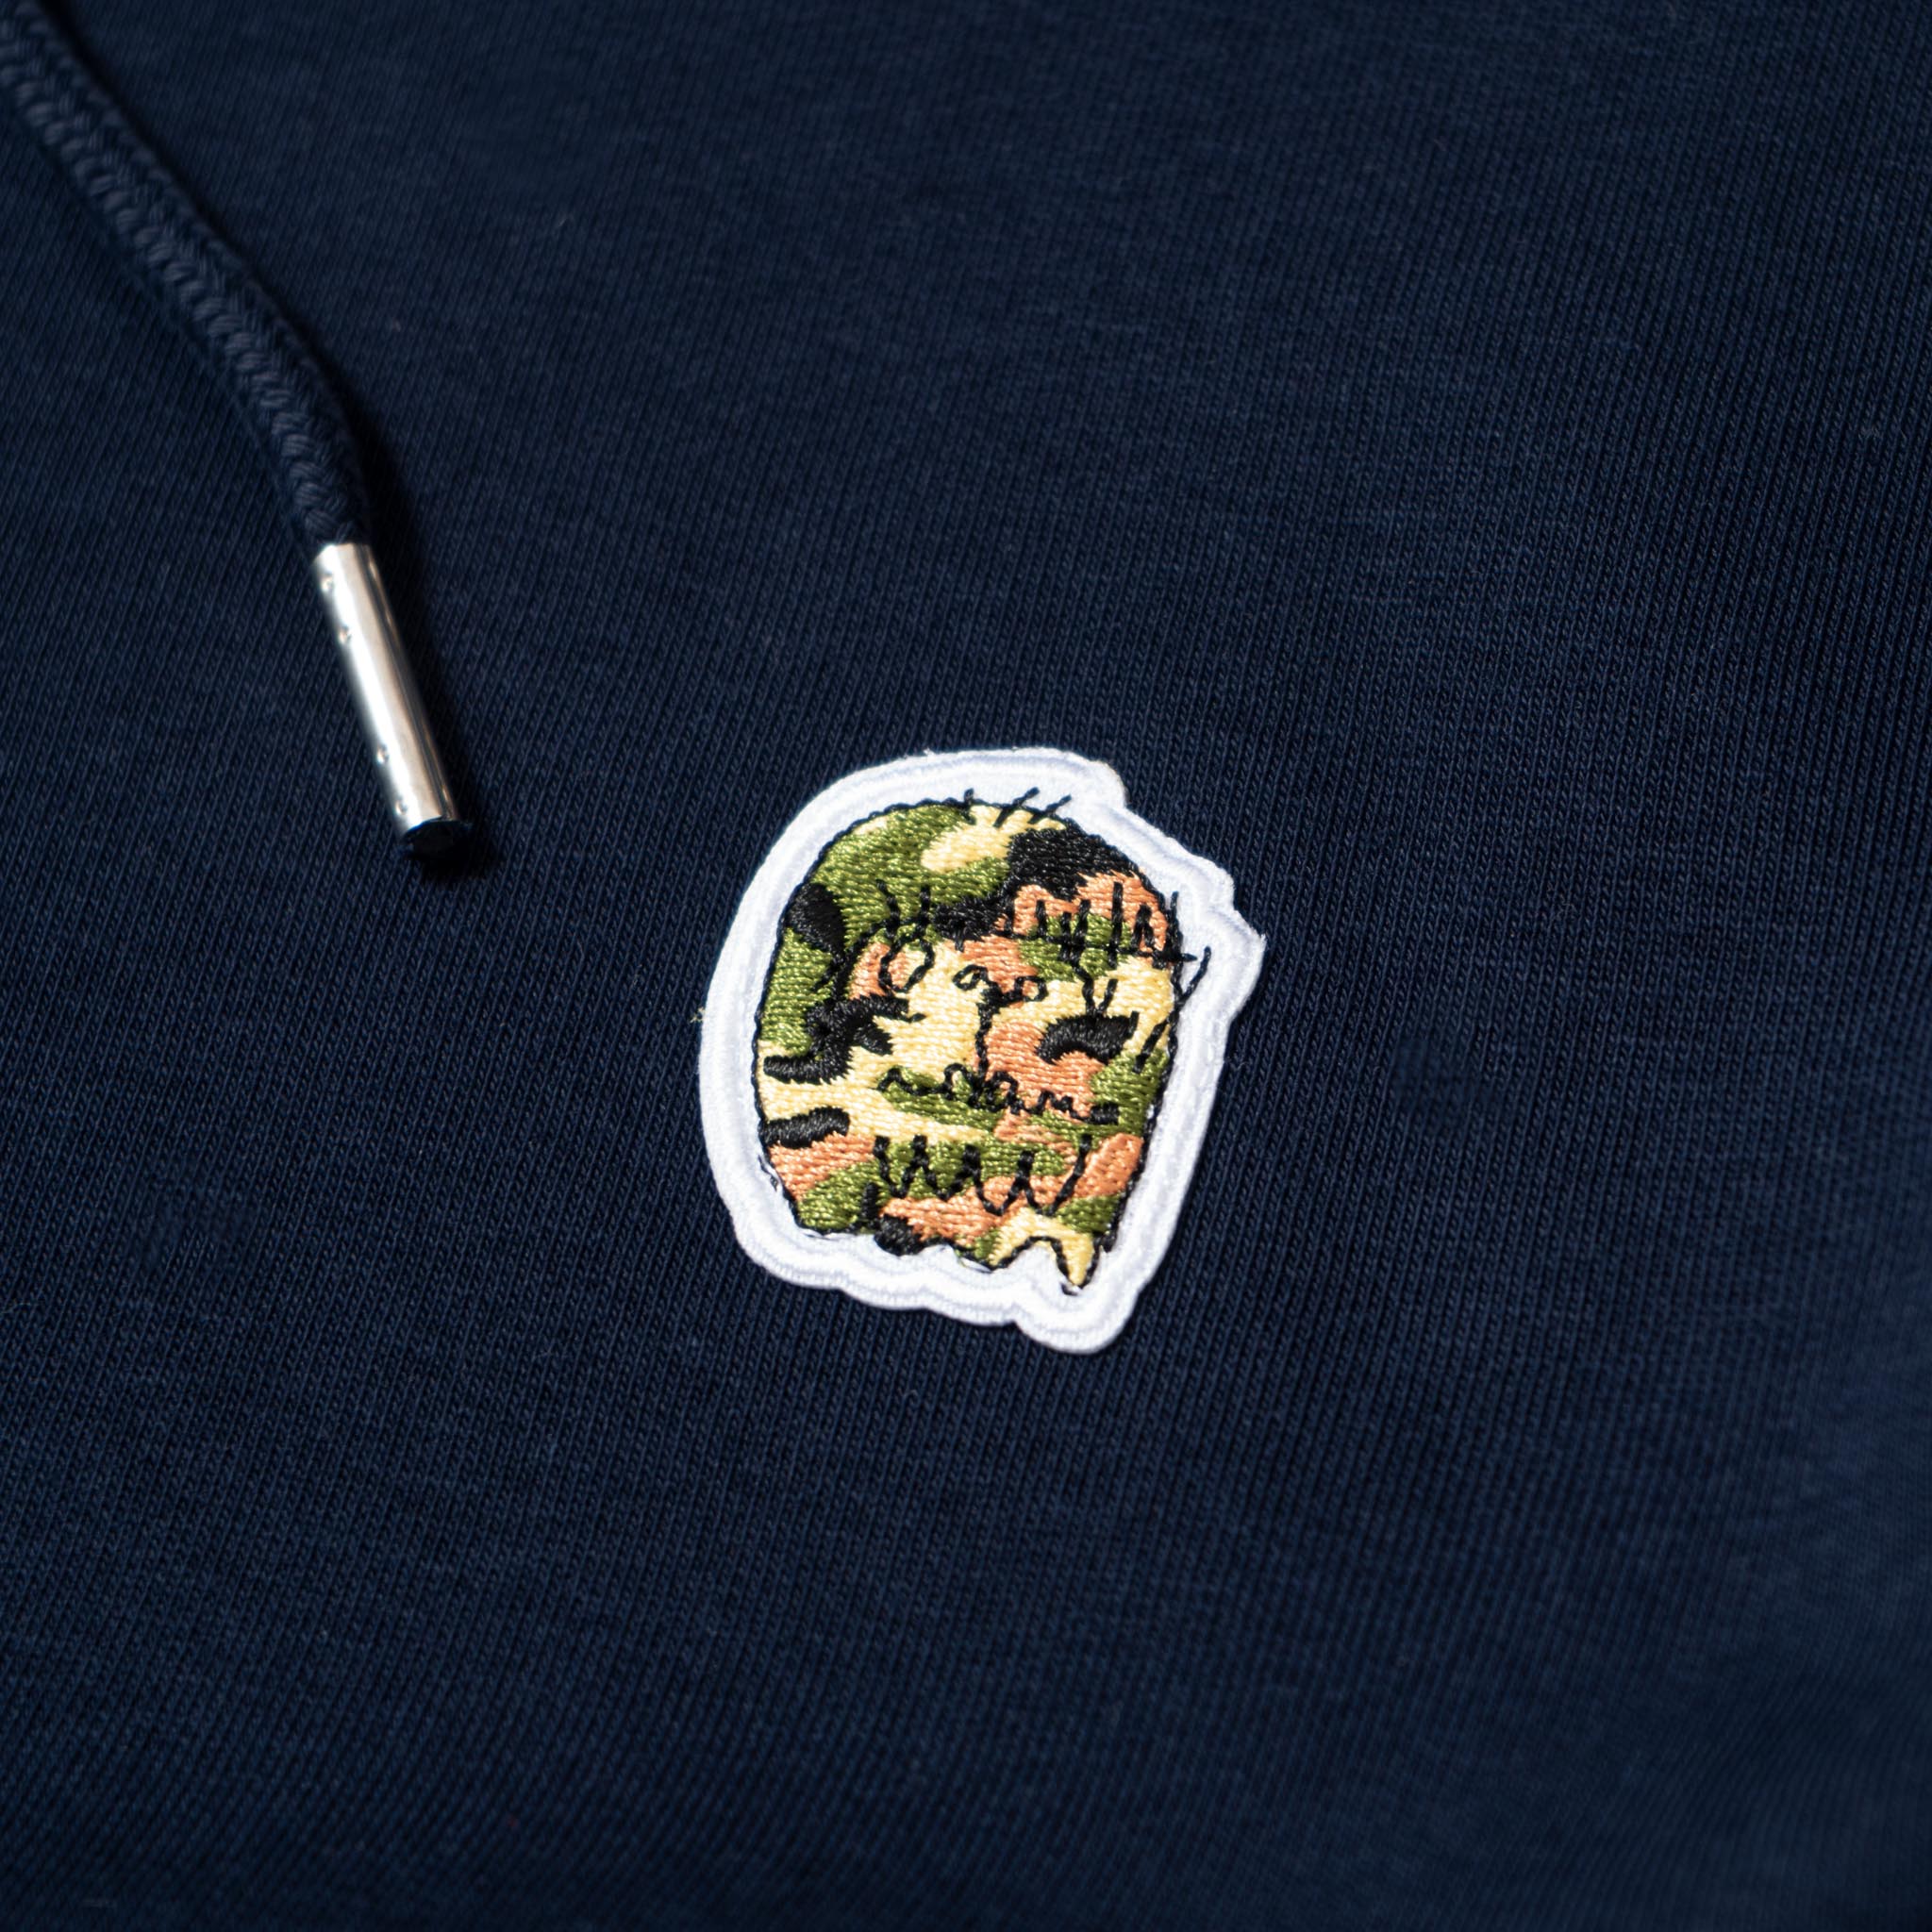 FORTY Tom Hoodie (Navy) xccscss.